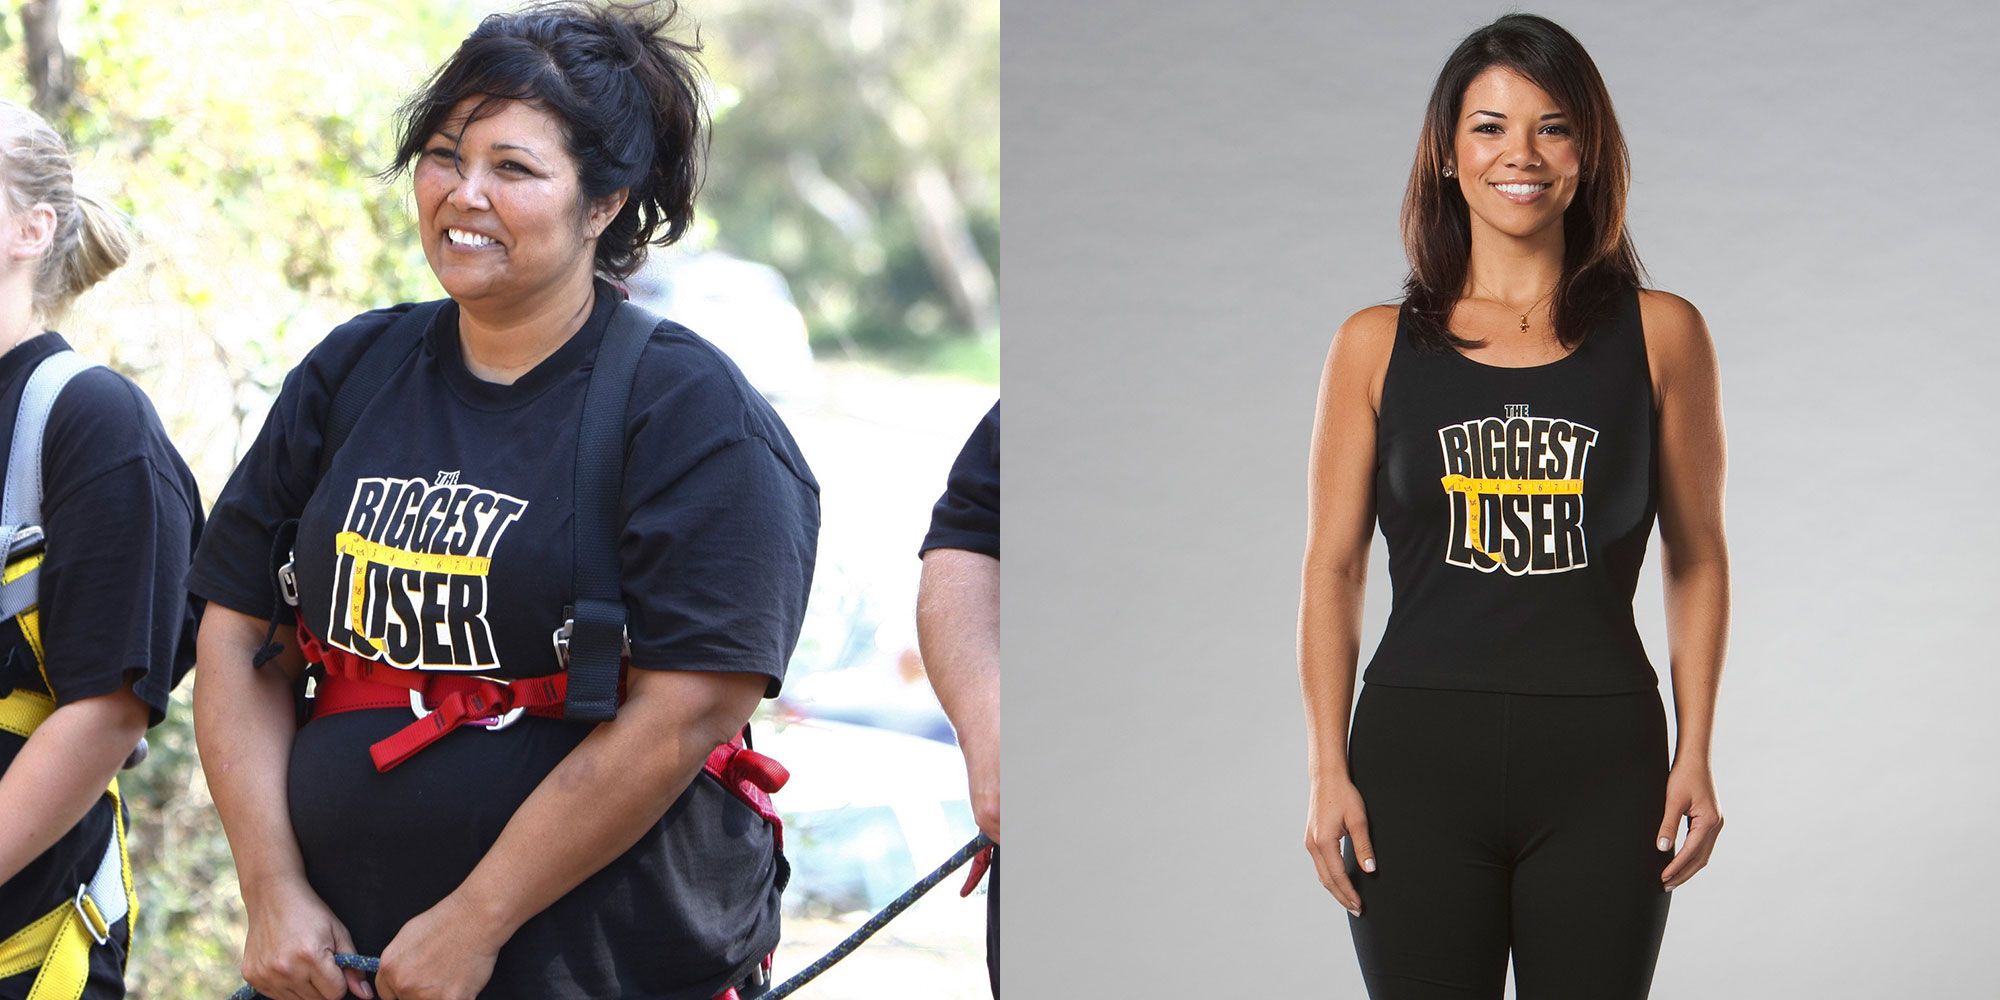 Who got married from the biggest loser?